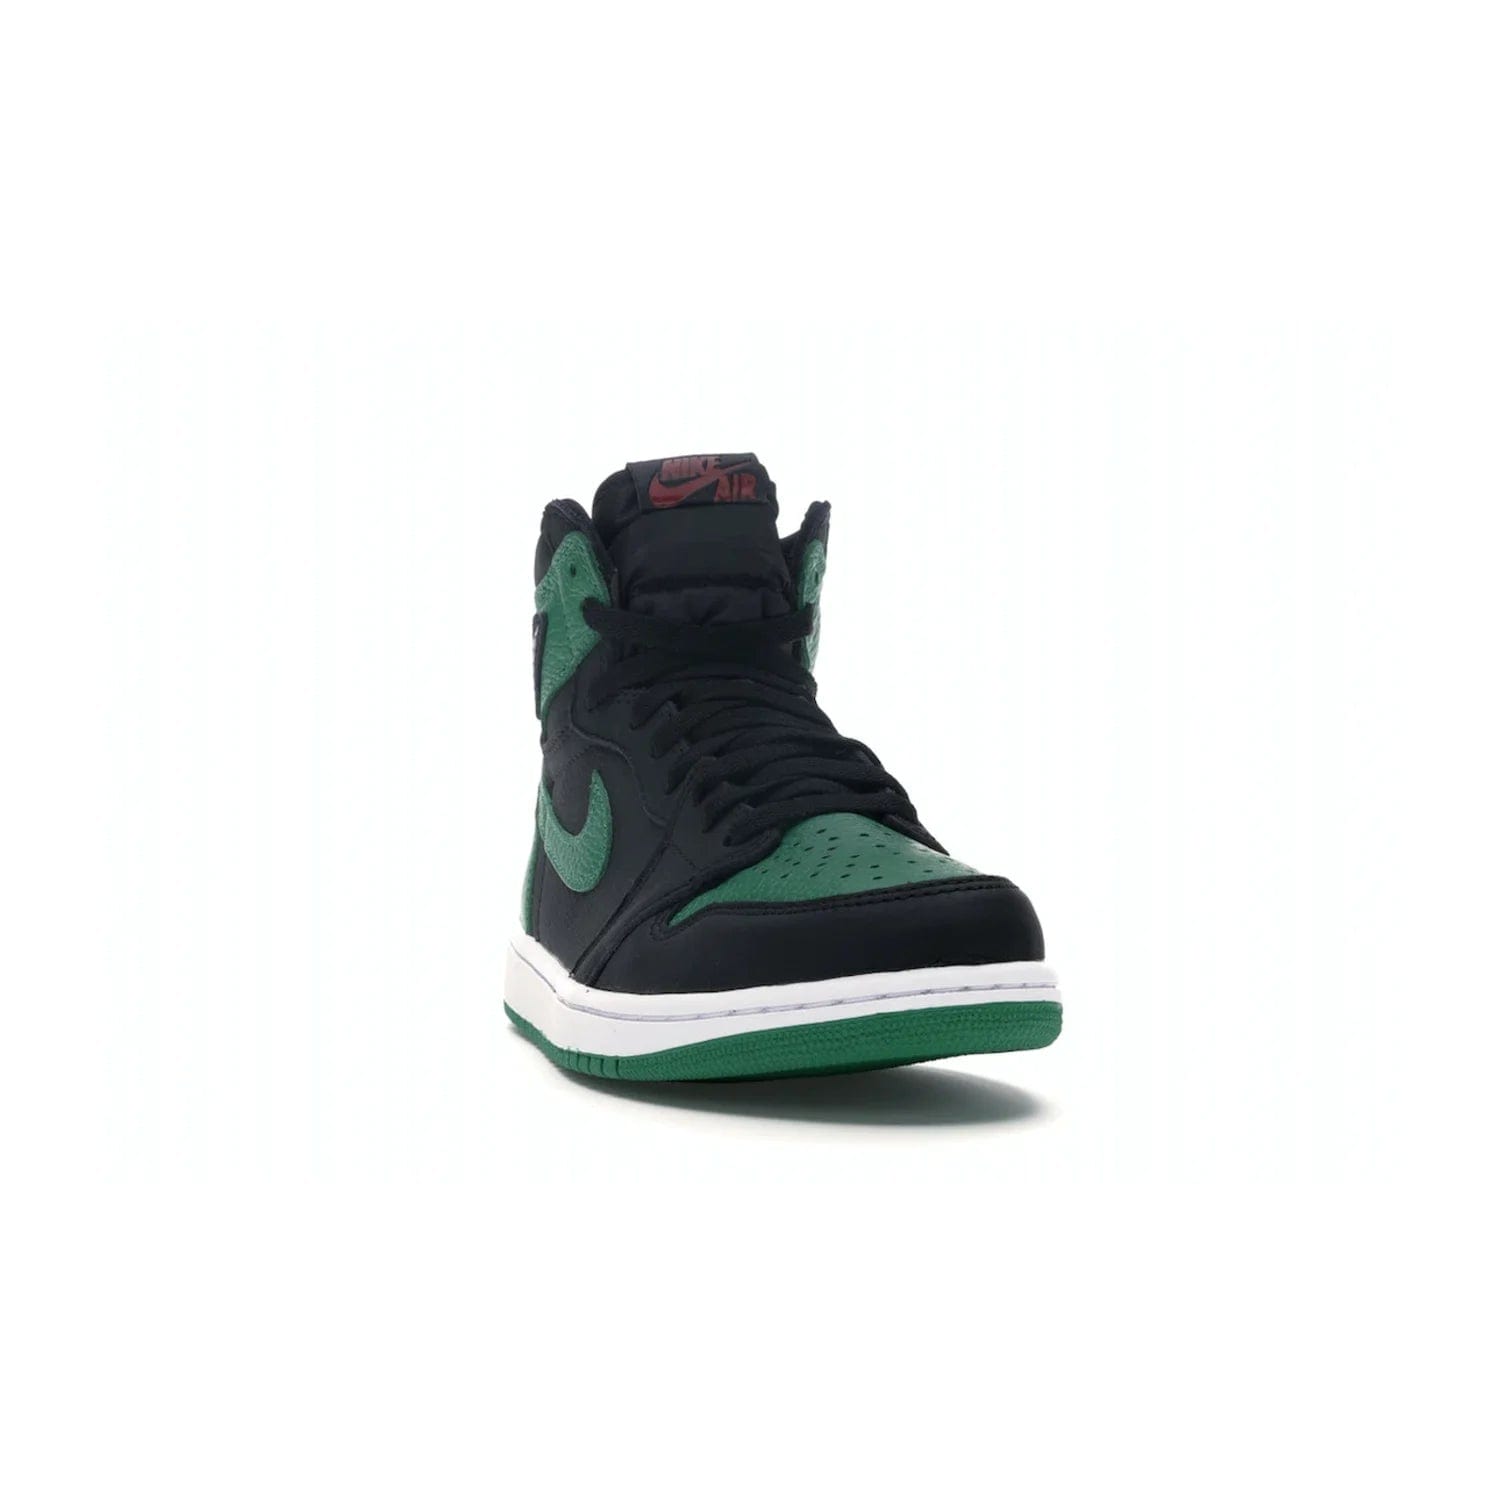 Jordan 1 Retro High Pine Green Black - Image 8 - Only at www.BallersClubKickz.com - Step into fresh style with the Jordan 1 Retro High Pine Green Black. Combining a black tumbled leather upper with green leather overlays, this sneaker features a Gym Red embroidered tongue tag, sail midsole, and pine green outsole for iconic style with a unique twist.